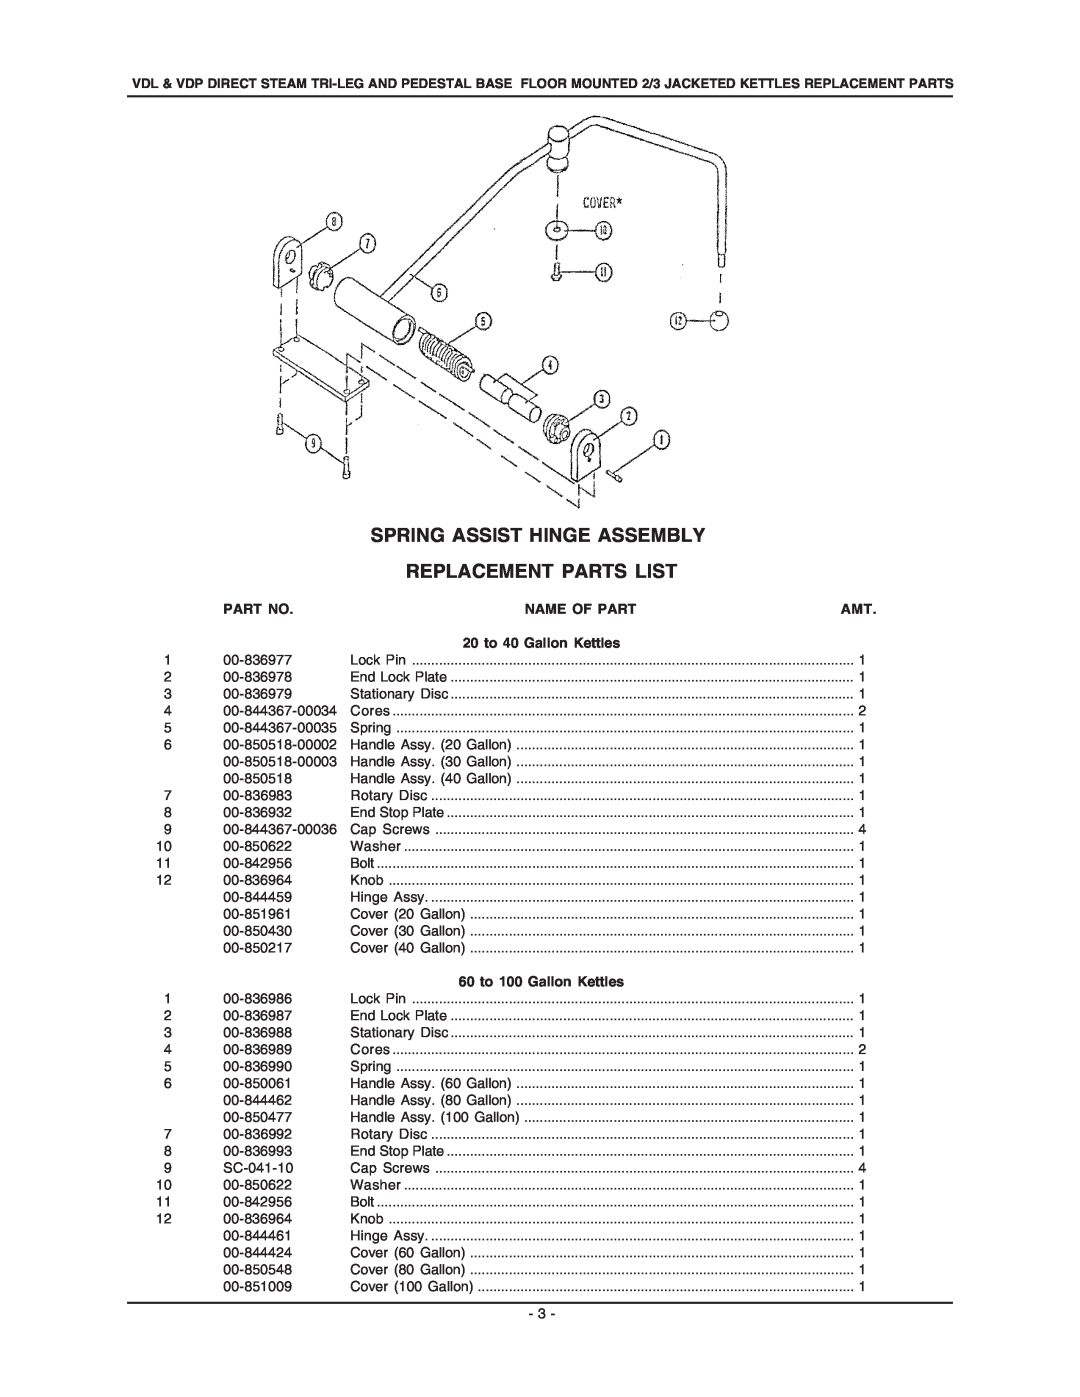 Vulcan-Hart VDP20, VDL20, VDP40, VDP60, VDP80, VDL100, VDL60 Spring Assist Hinge Assembly, Replacement Parts List, Name Of Part 